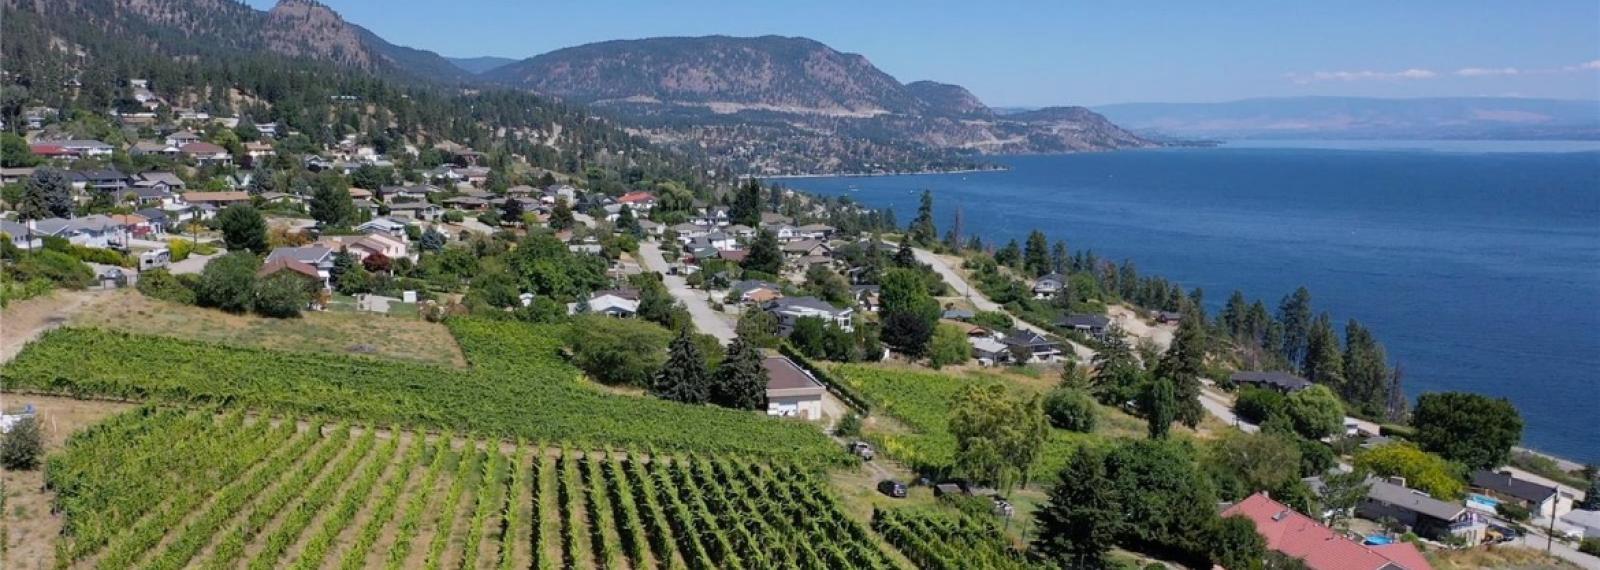 Sloping winery with lake adjacent in Peachland, BC